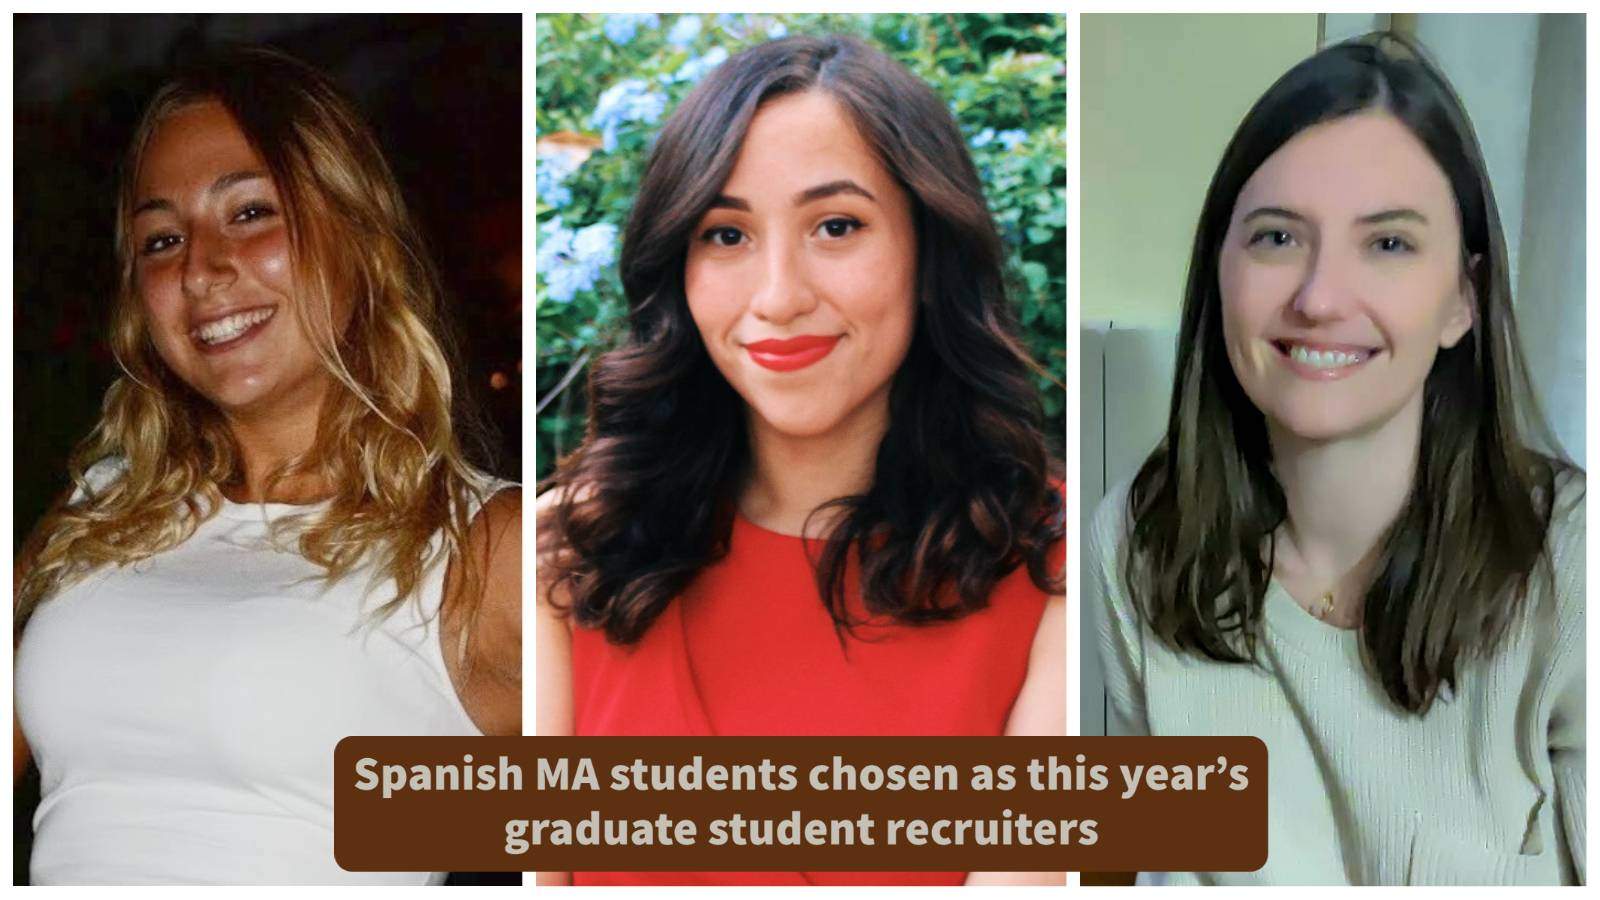 Image: three women, one dressed in white in front of a dark background, one dressed in red in front of greenery, one dressed in light green in front of a pale green wall. Text: Spanish MA students chosen as this year’s graduate student recruiters